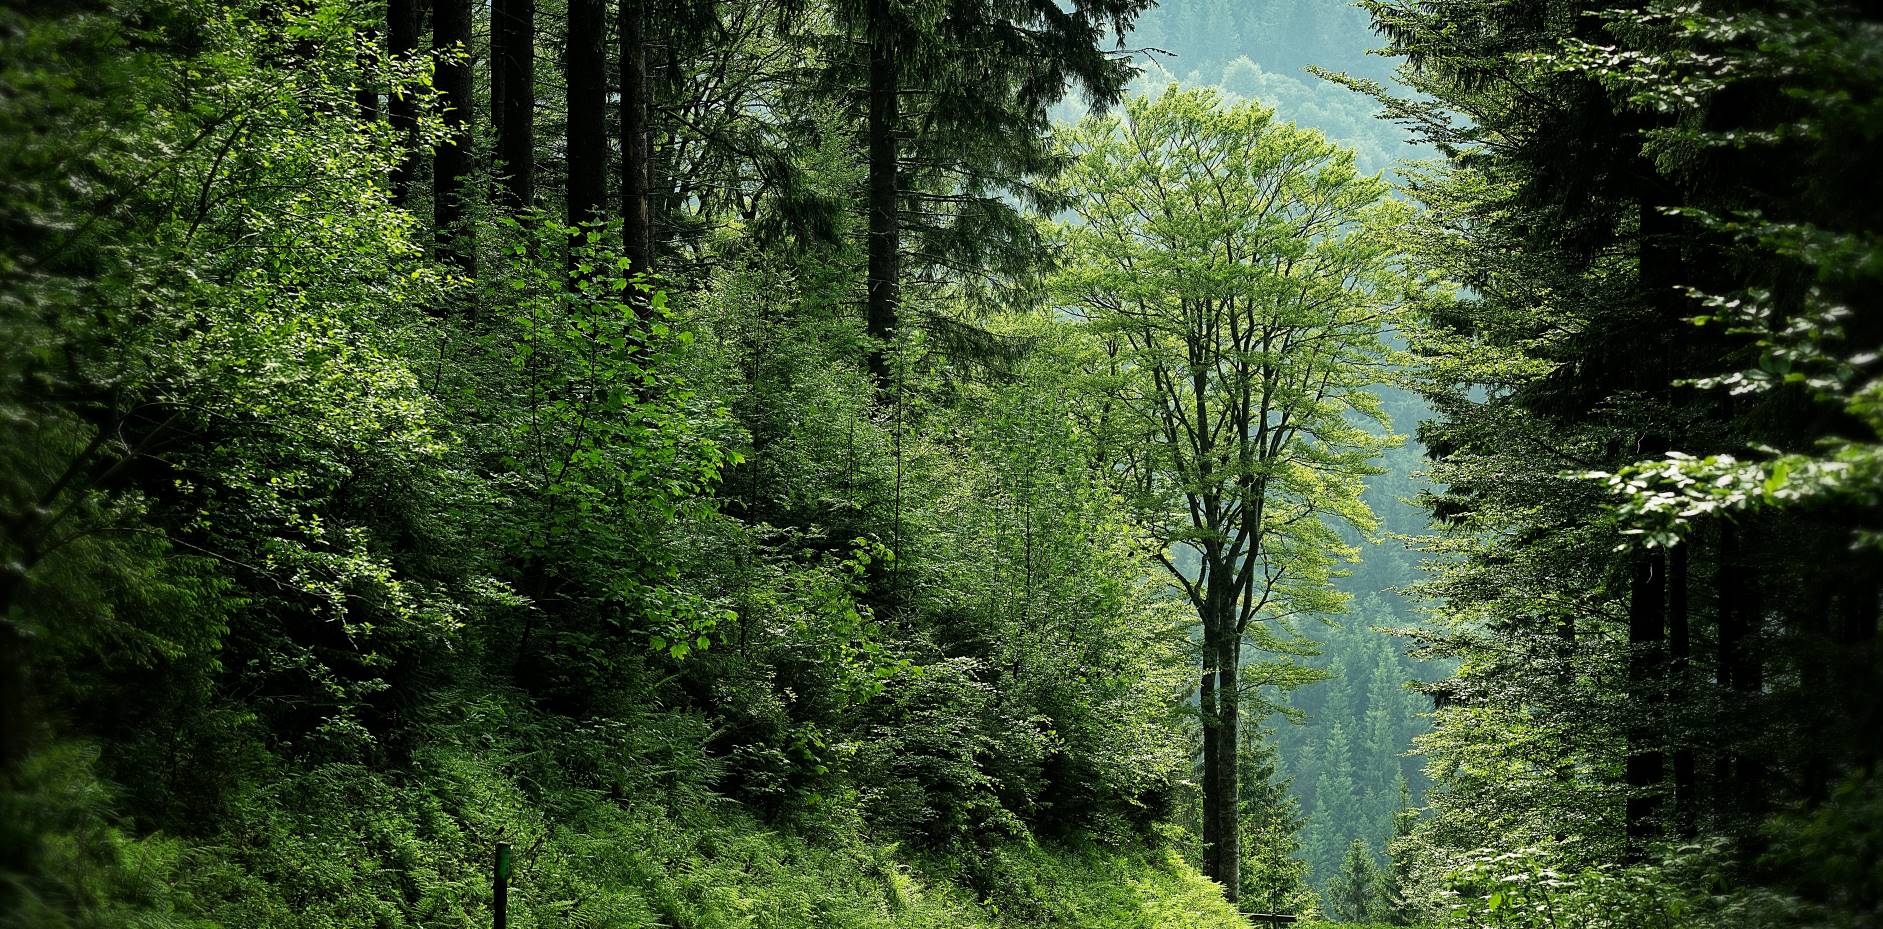 A brilliant green forest.